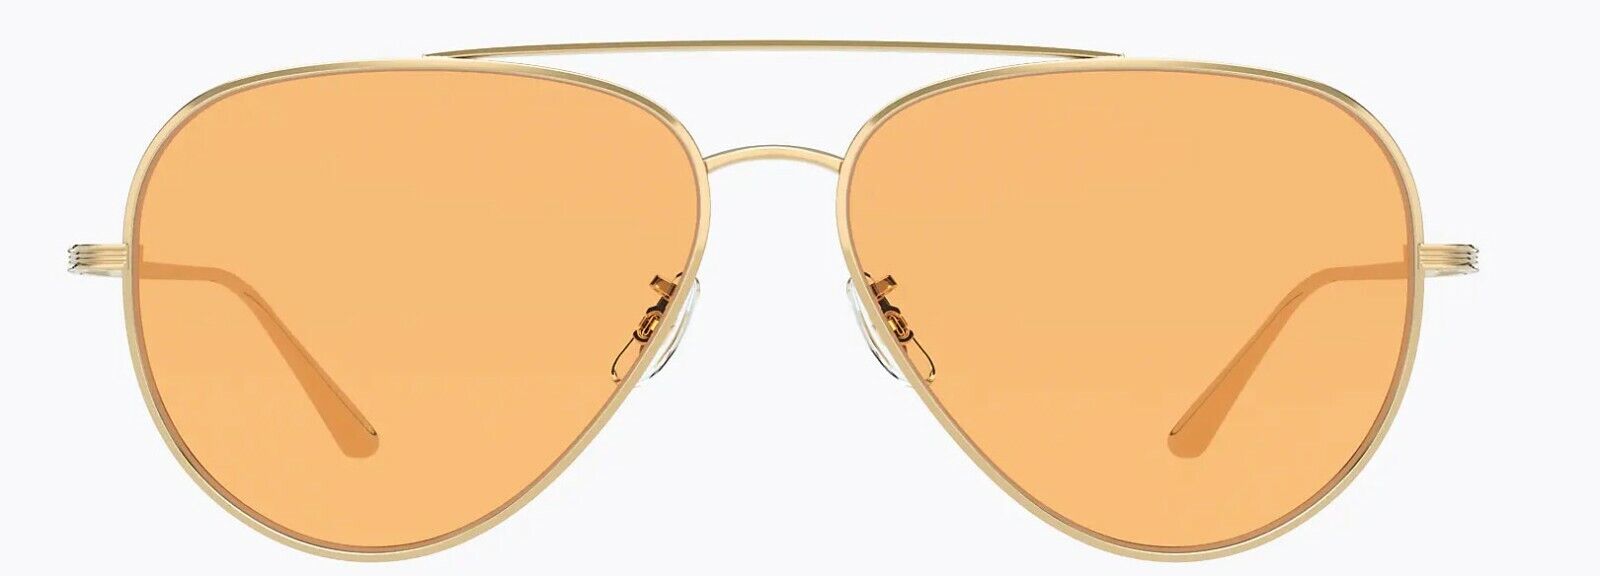 Oliver Peoples Sunglasses 1277ST 5292V9 The Row Casse Gold /Tangerine Photo 61mm-827934450950-classypw.com-1